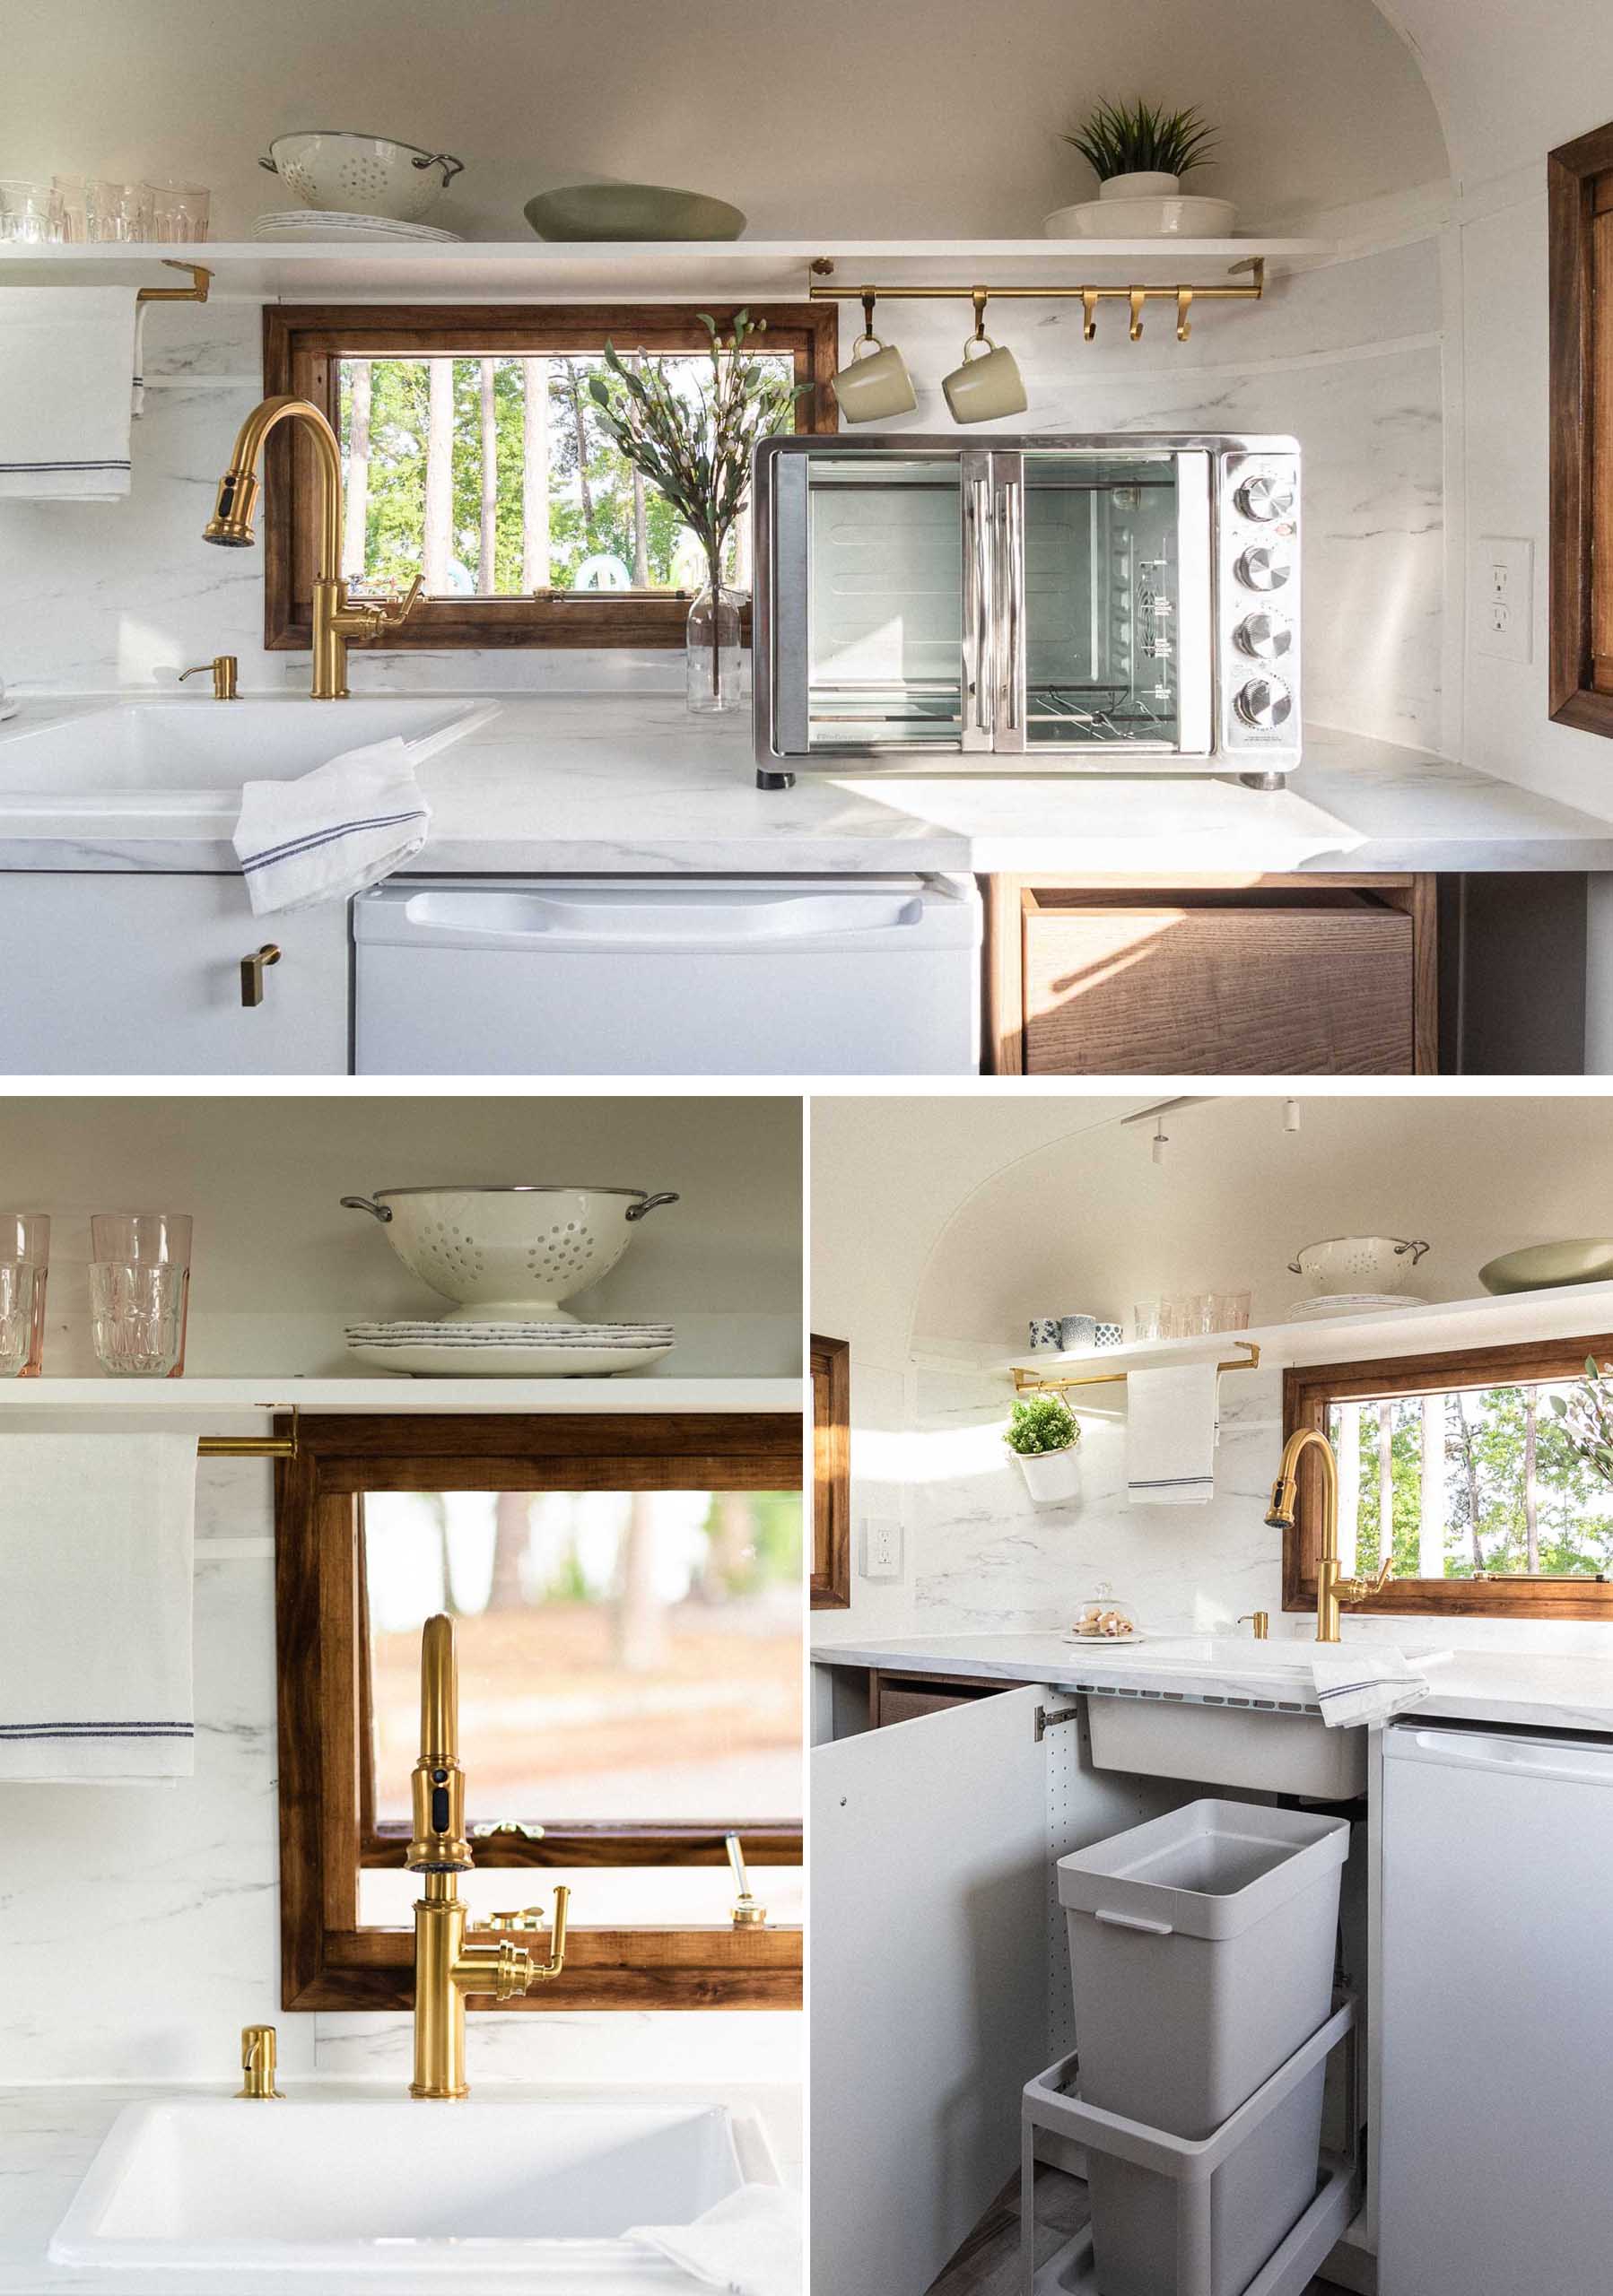 The remodeled kitchen of this vintage travel trailer includes wood cabinetry, a shelf, and a light colored countertop. There's also an induction cooktop and convection oven.